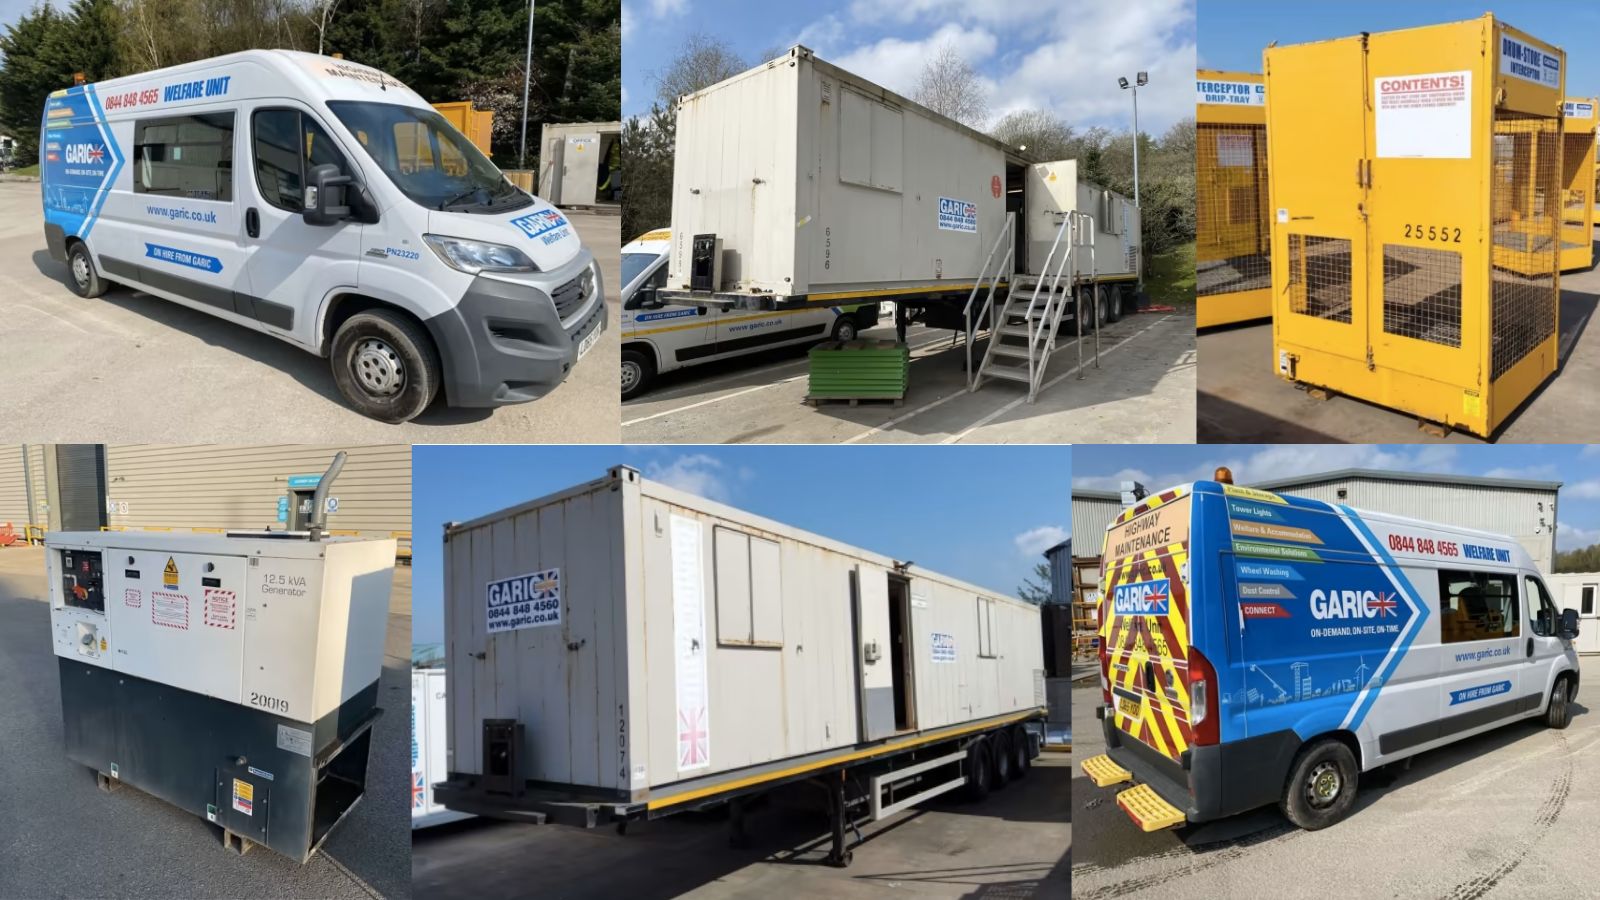 Ex-hire fleet equipment on behalf of Garic now available at auction